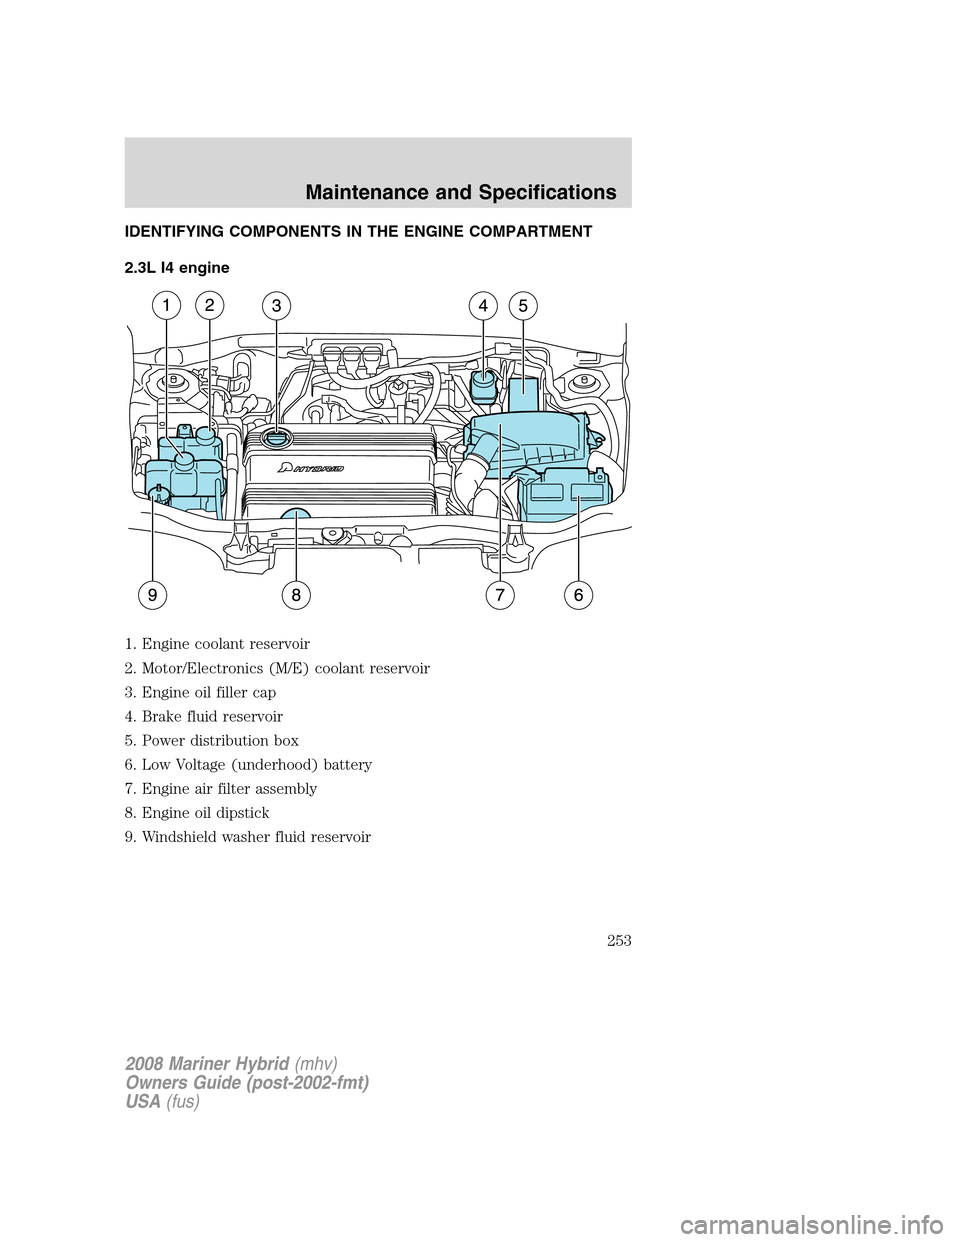 Mercury Mariner Hybrid 2008  s Owners Guide IDENTIFYING COMPONENTS IN THE ENGINE COMPARTMENT
2.3L I4 engine
1. Engine coolant reservoir
2. Motor/Electronics (M/E) coolant reservoir
3. Engine oil filler cap
4. Brake fluid reservoir
5. Power dist